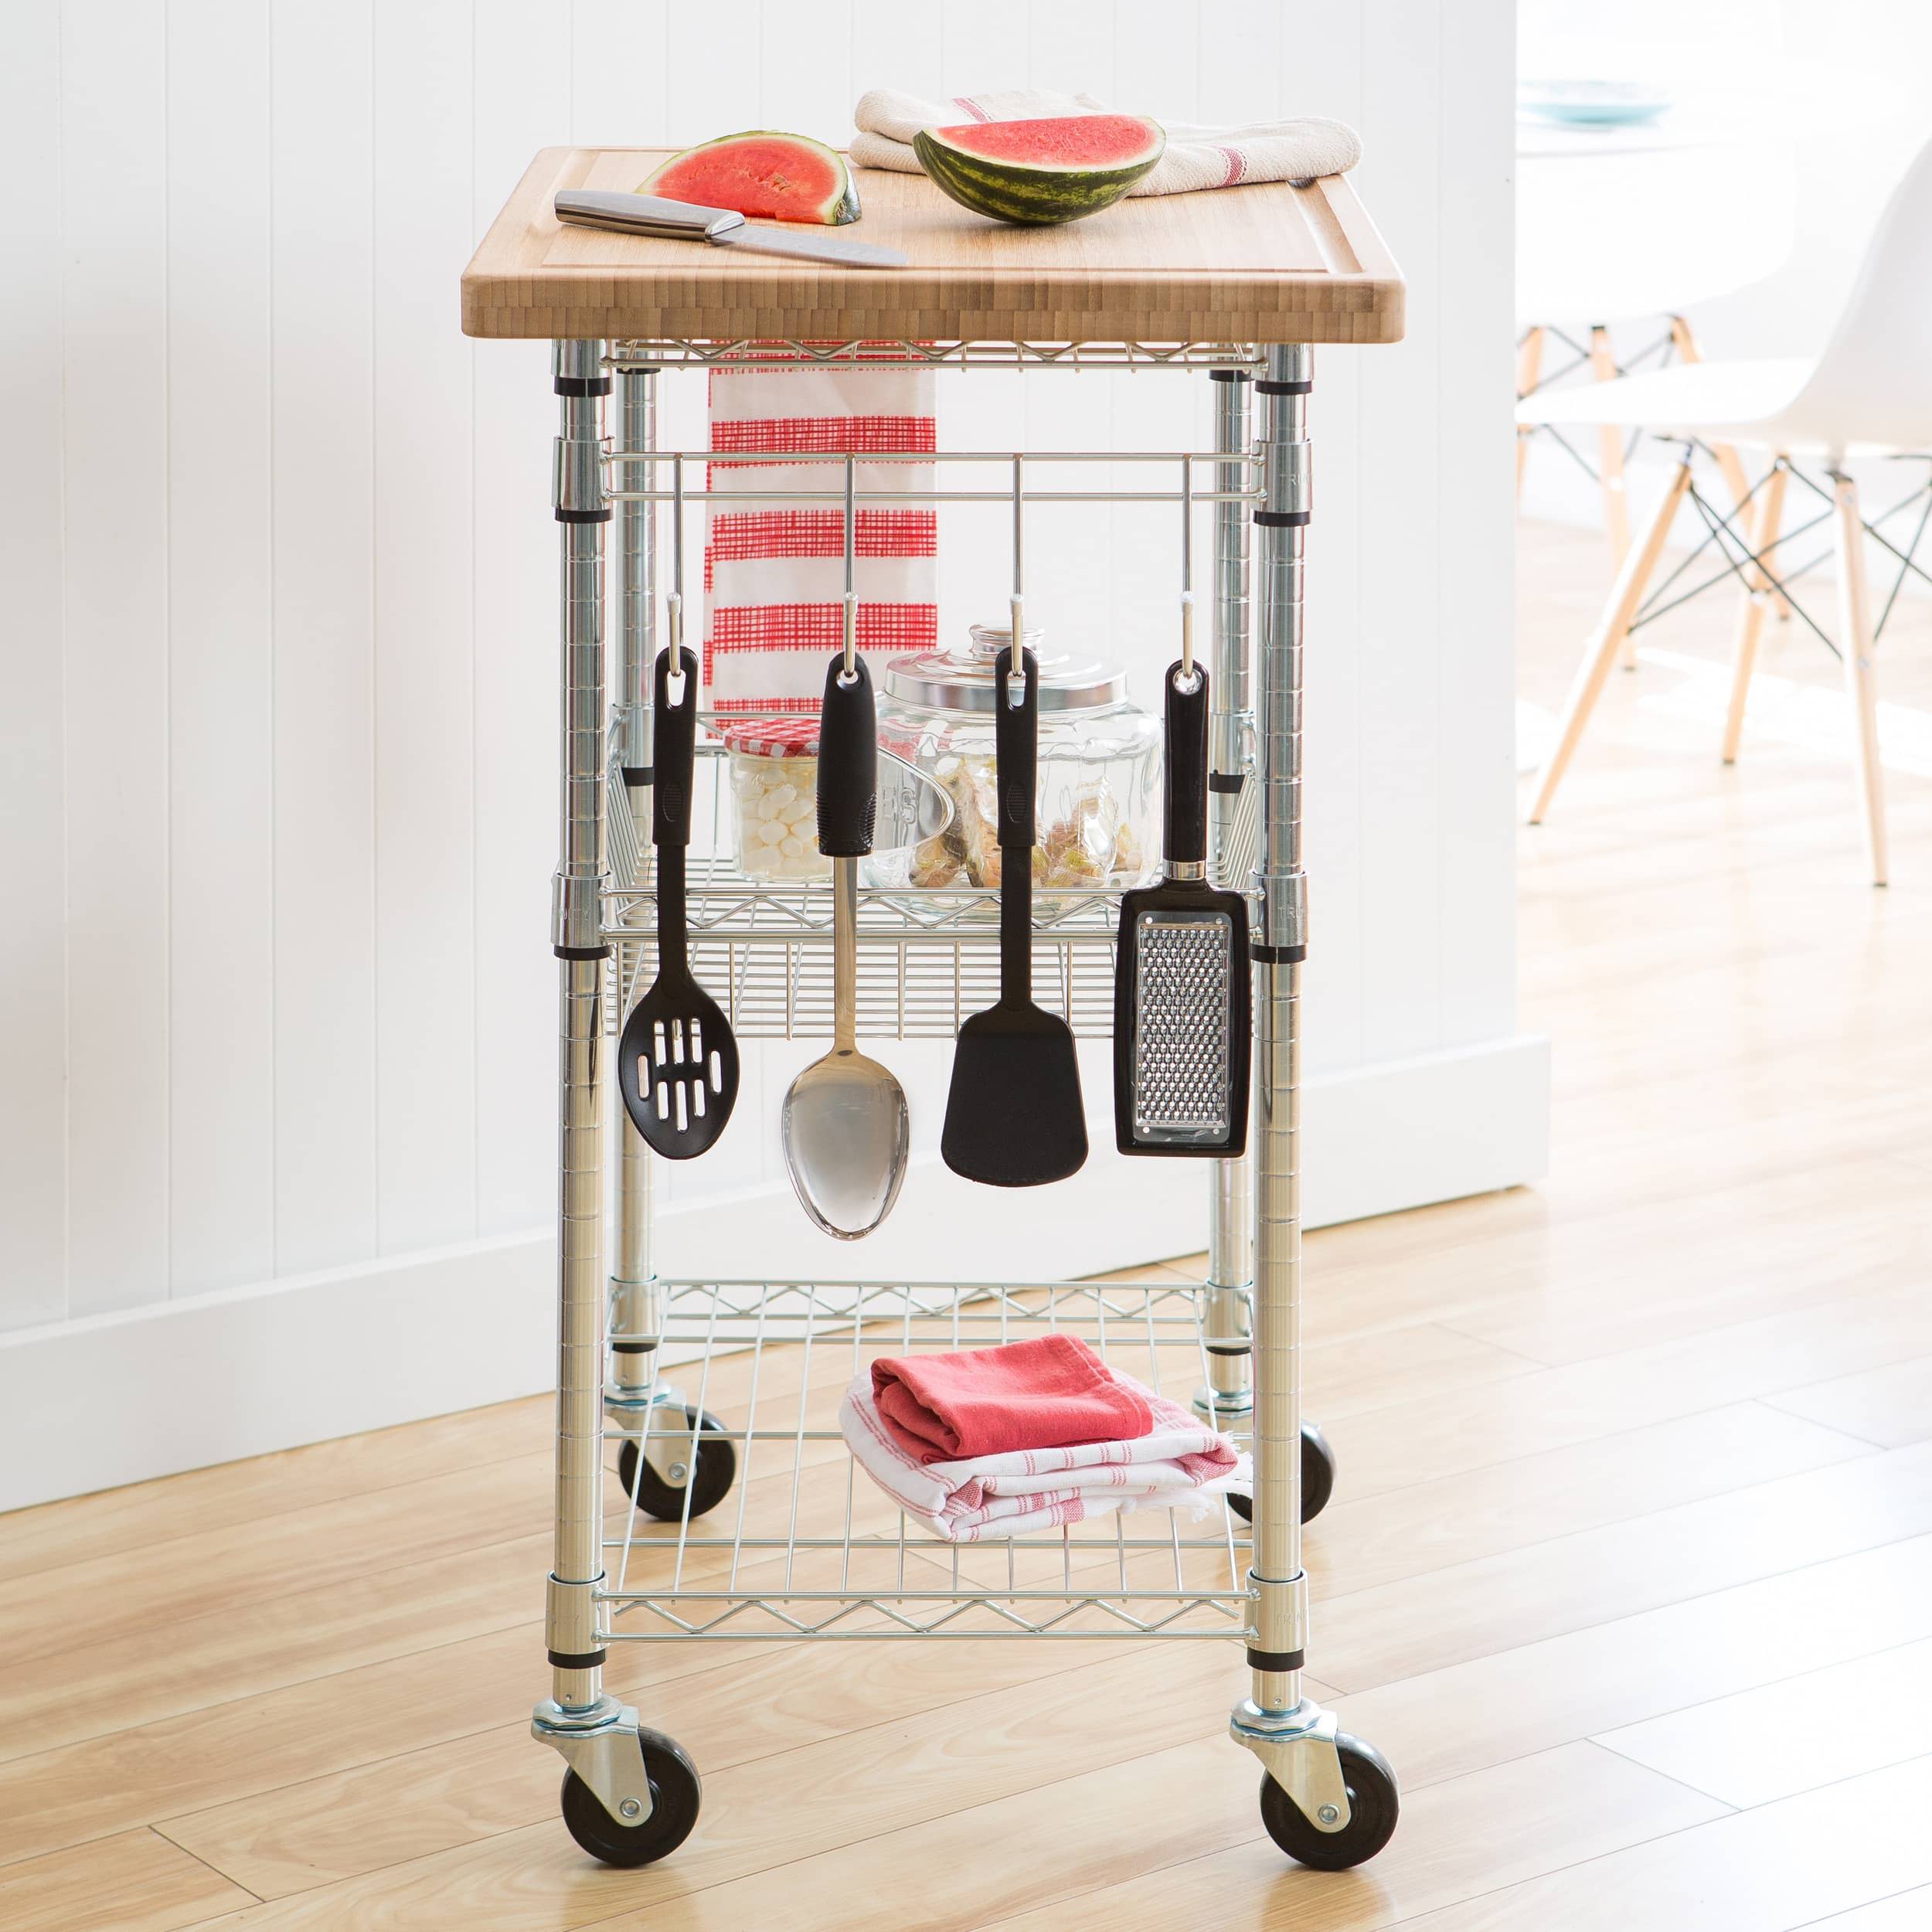 kitchen cart with hanging bar filled with cooking utensils